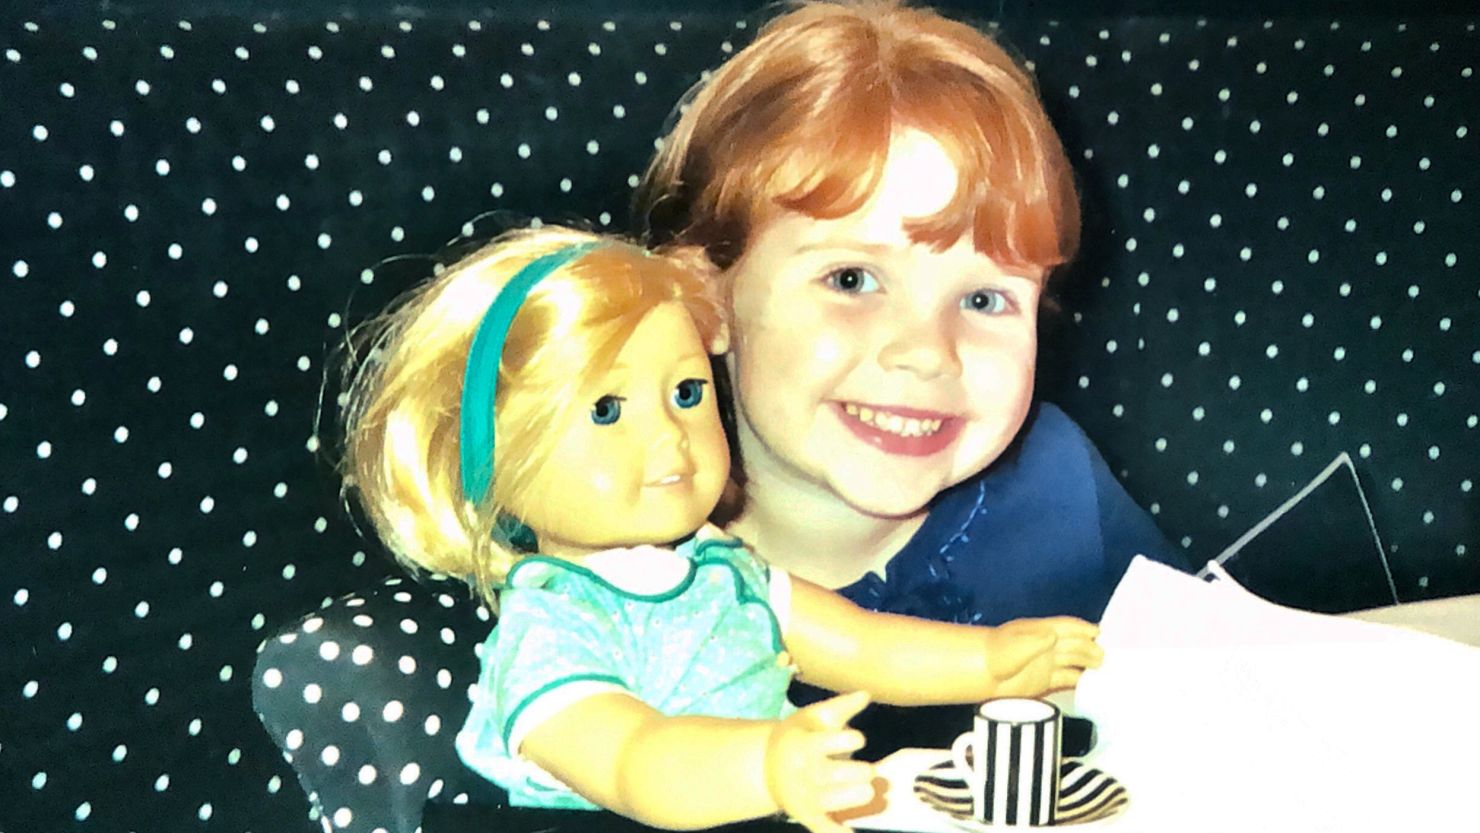 Hannah, age 5, at the American Girl Doll store cafe in Chicago in October 2003.